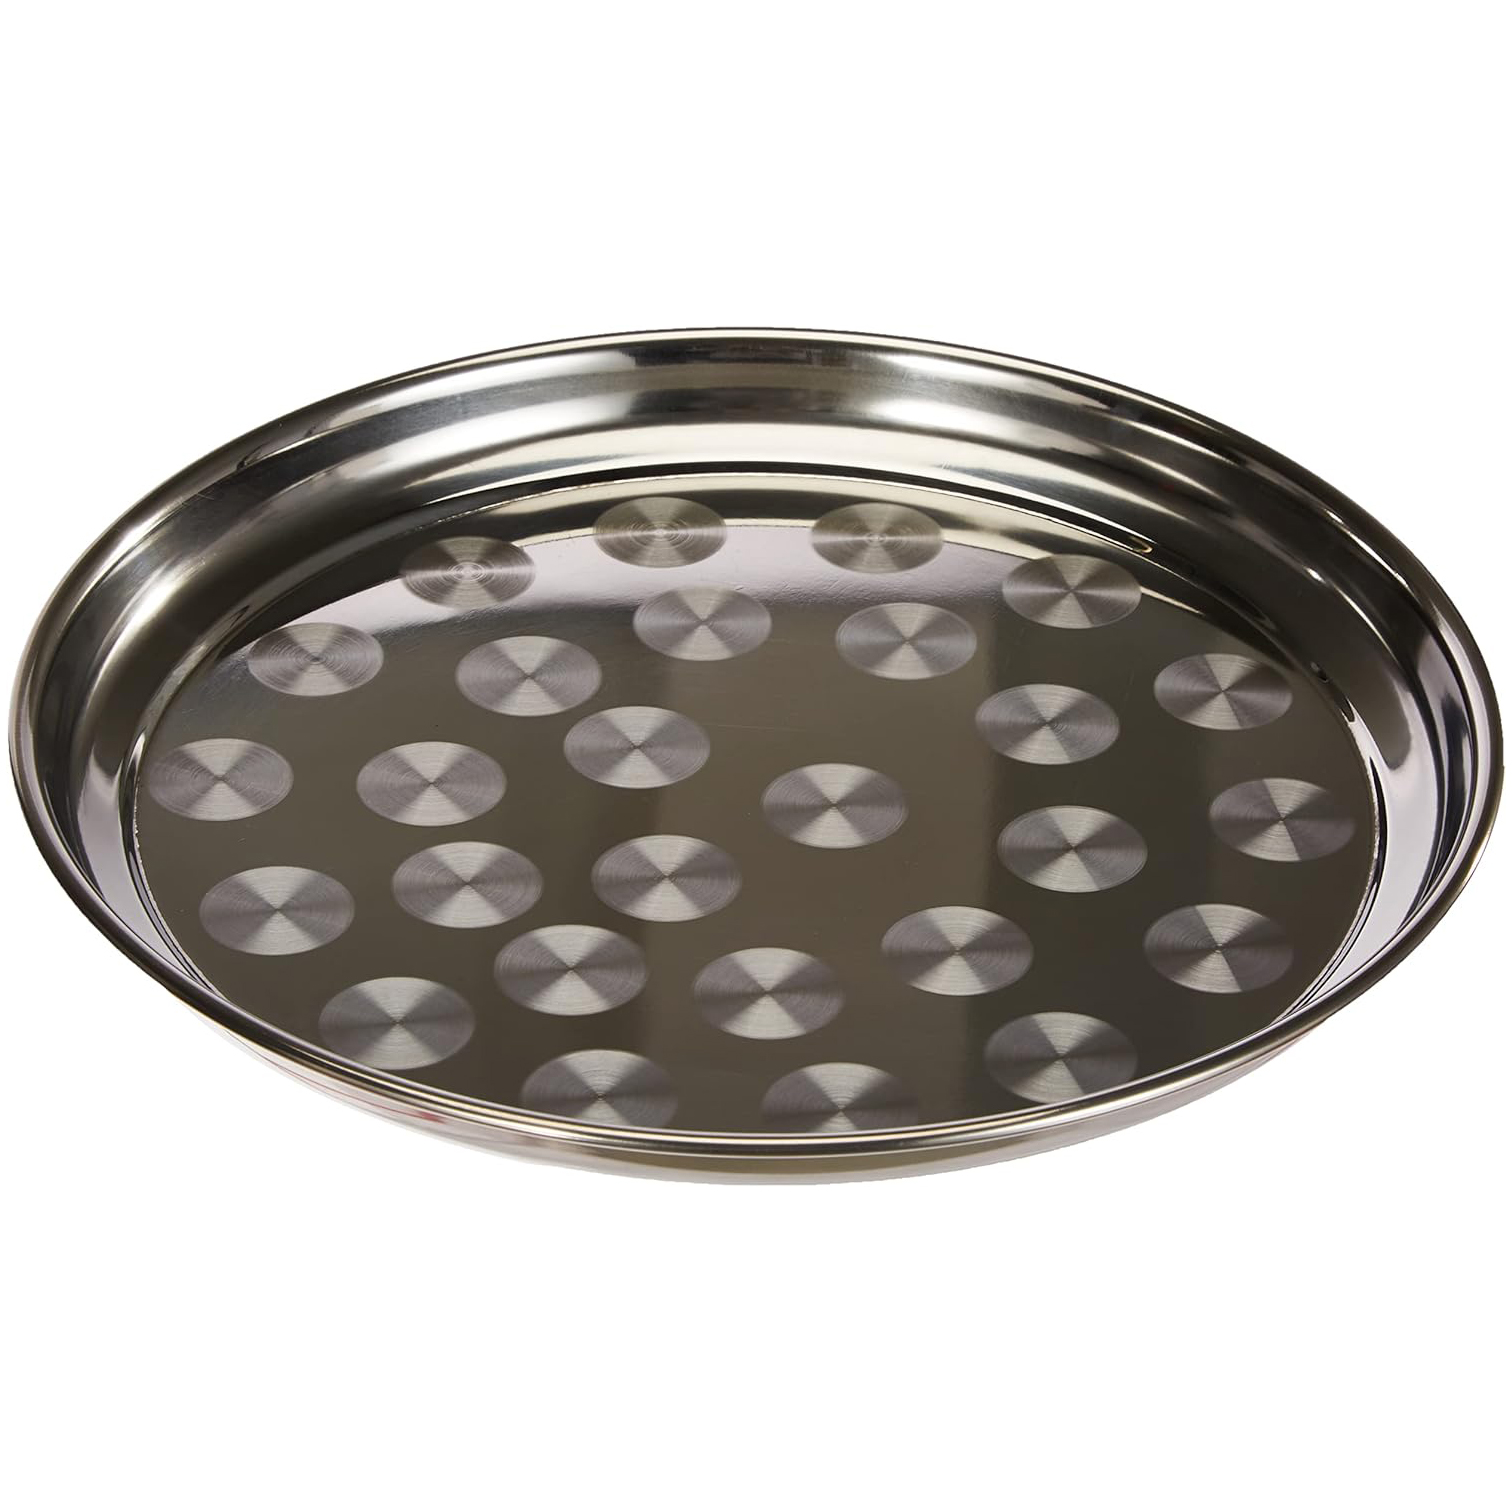 Stainless steel round tray with swirl pattern, serving/display tray 60cm